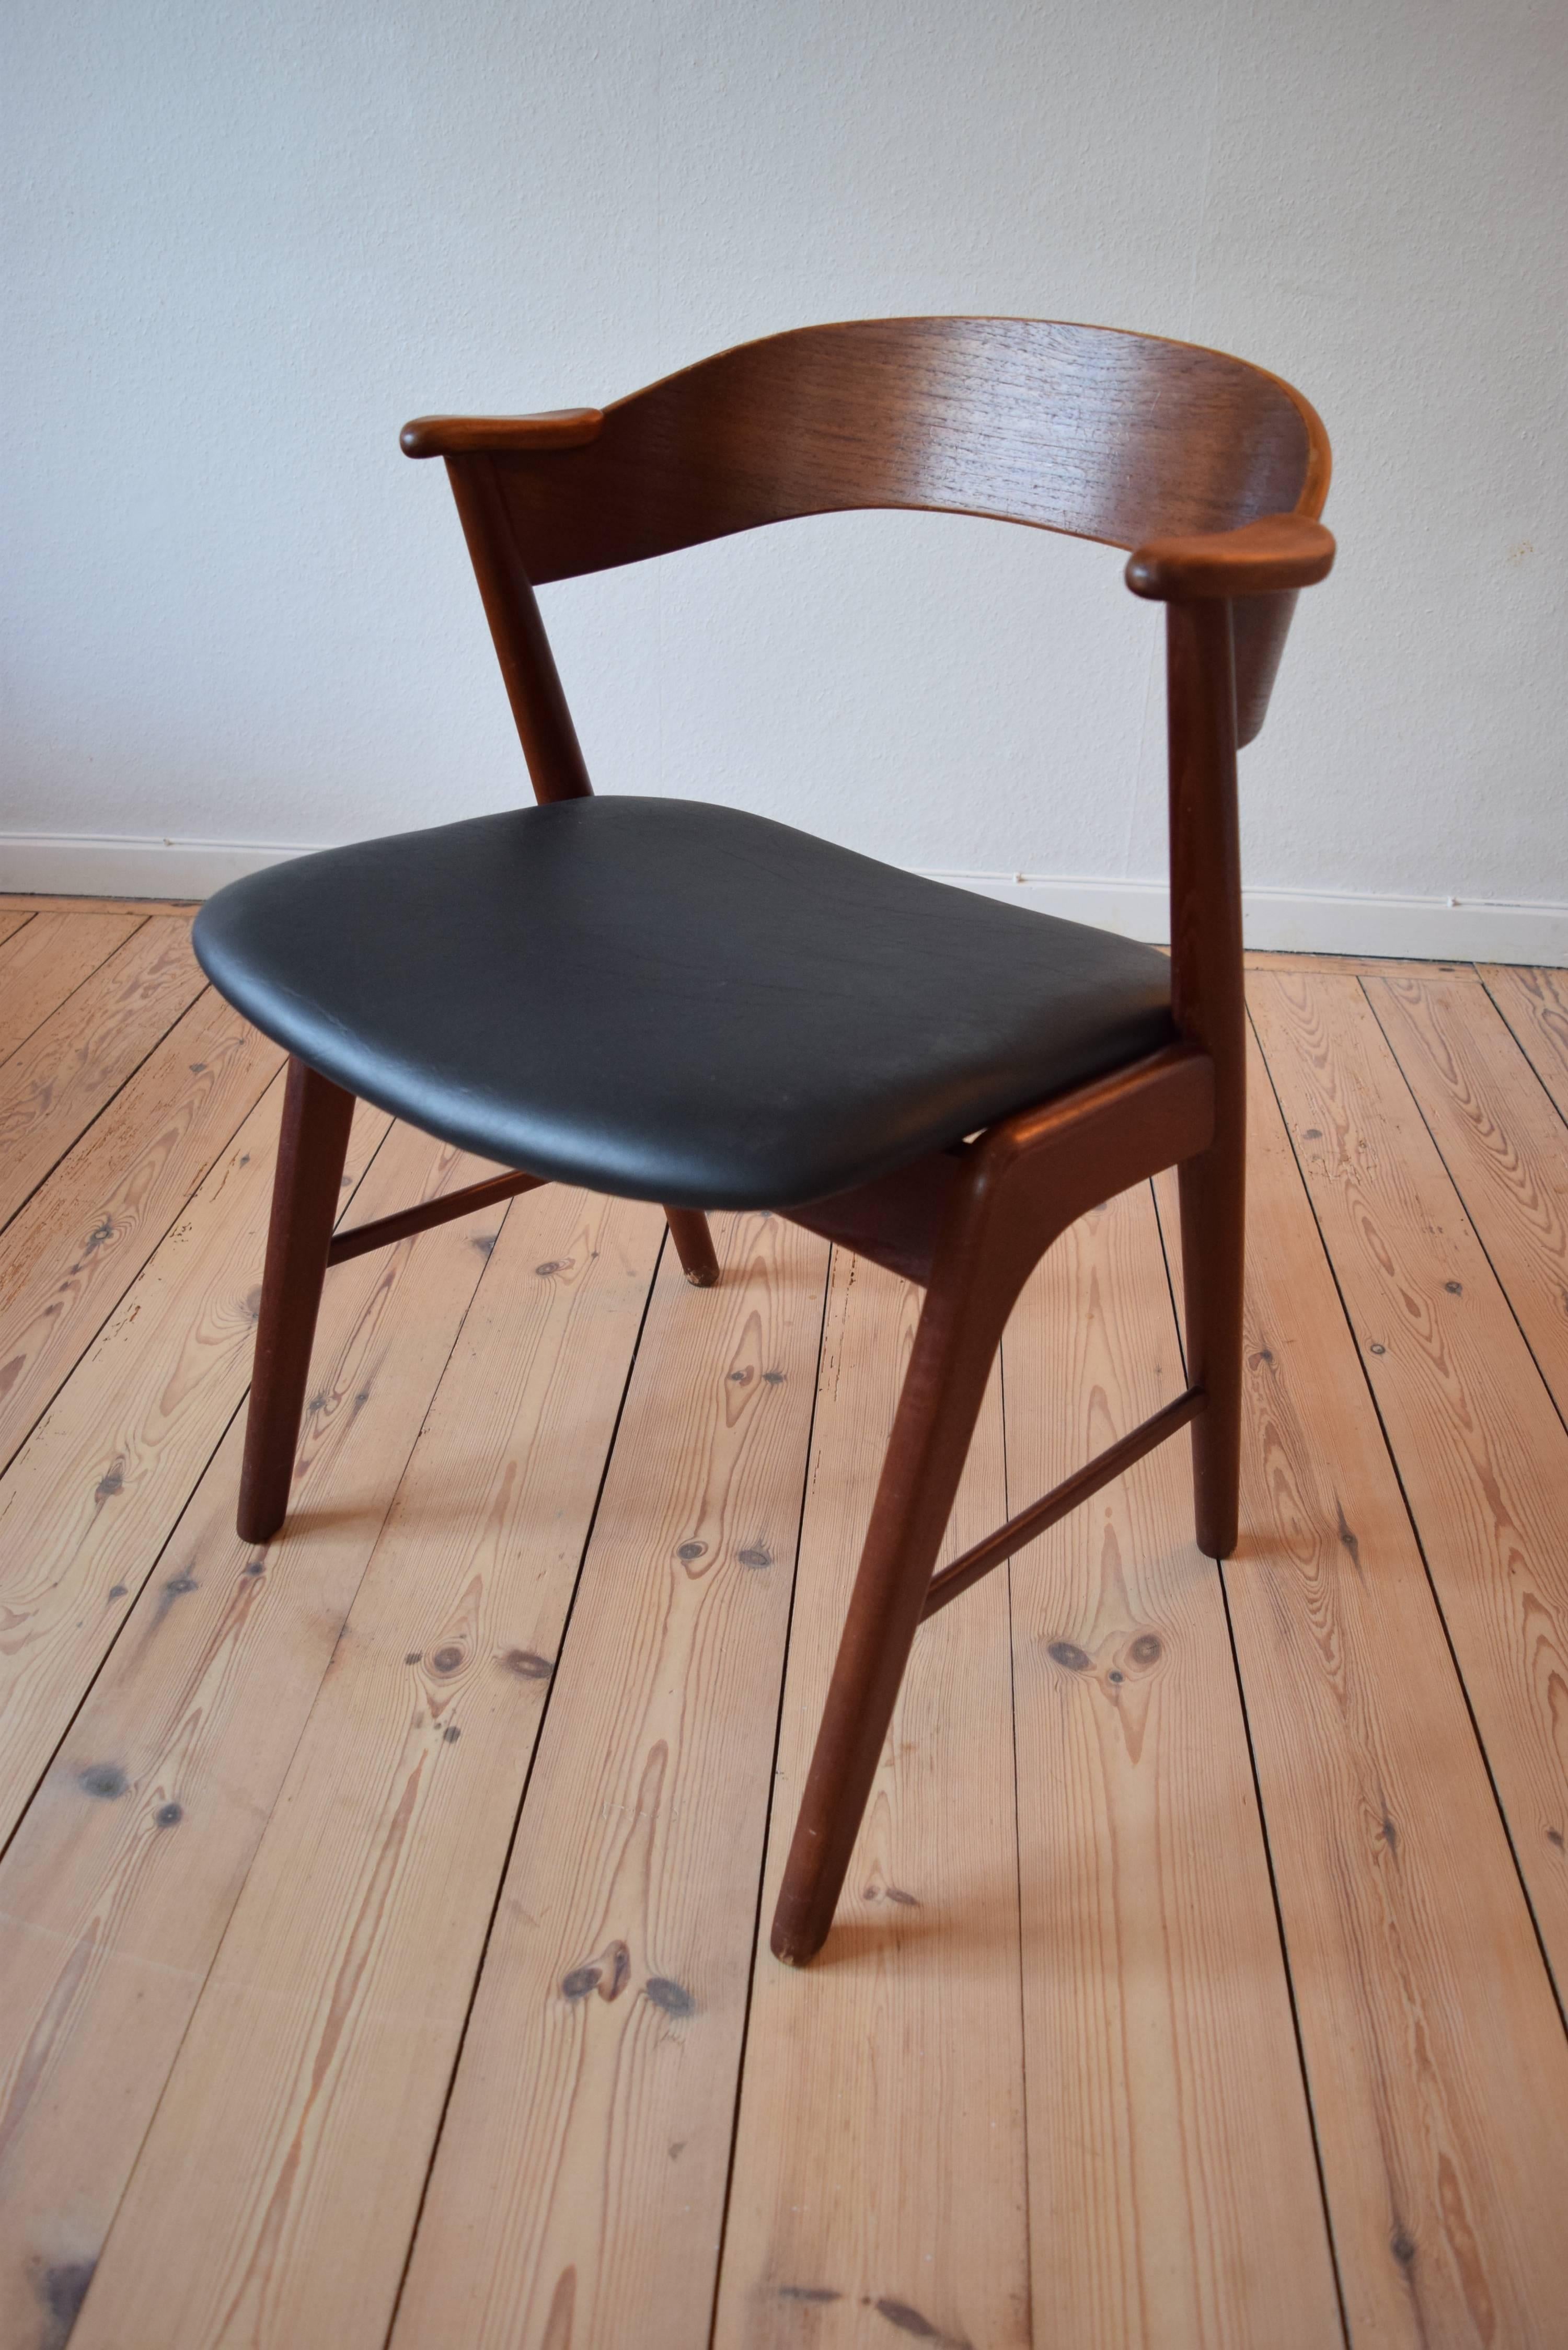 Vintage teak armchair designed by Kai Kristiansen for Kørup Møbelfabrik, Denmark in the 1960s. Features curved backrest and teak armlets. Newly recovered with high quality thick black Skai.